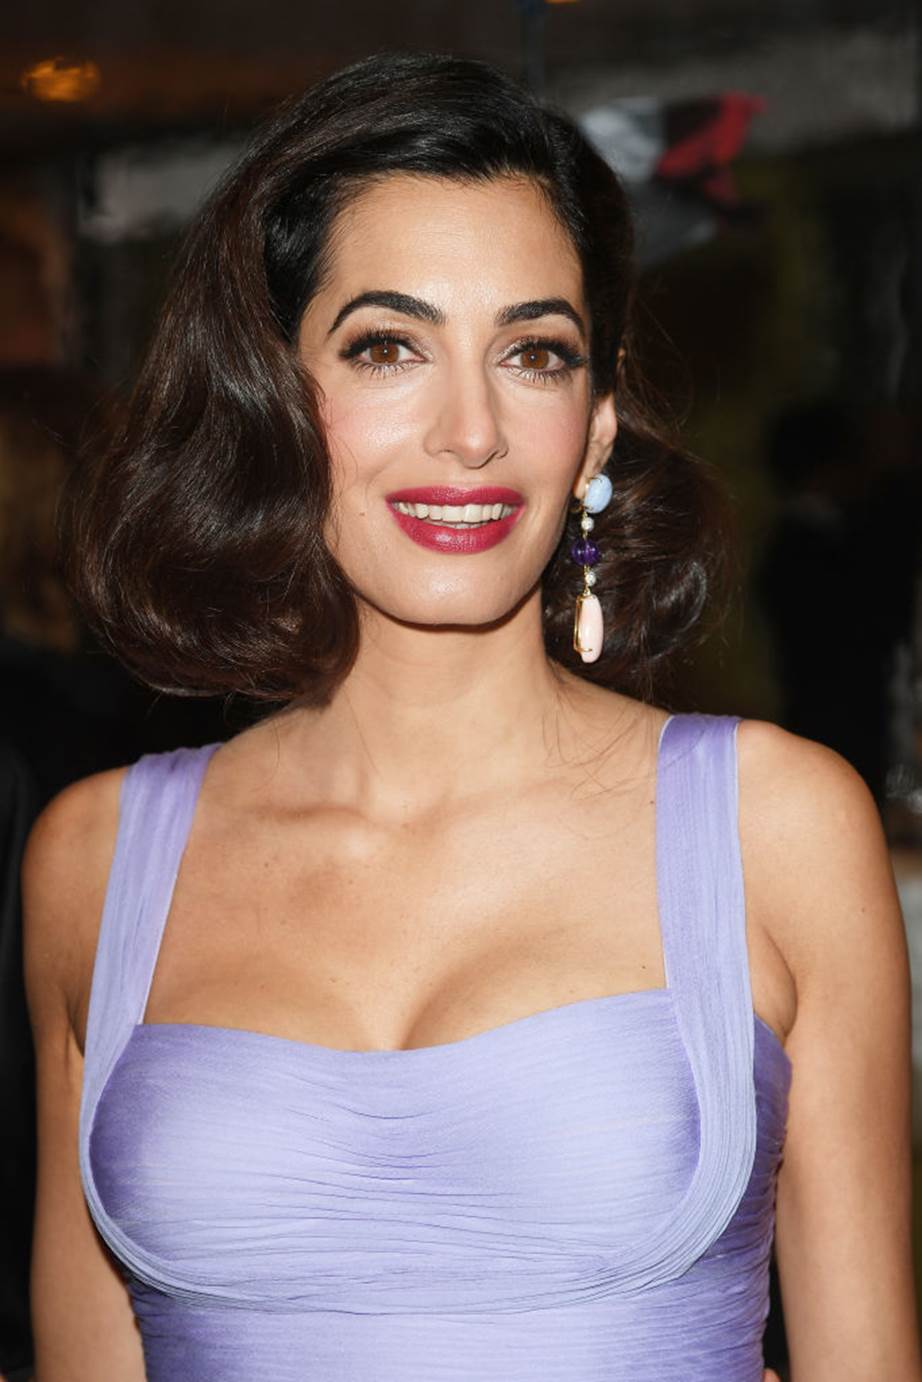 Amal Clooney pictured in September 2017 at the 74th Venice Film Festival.